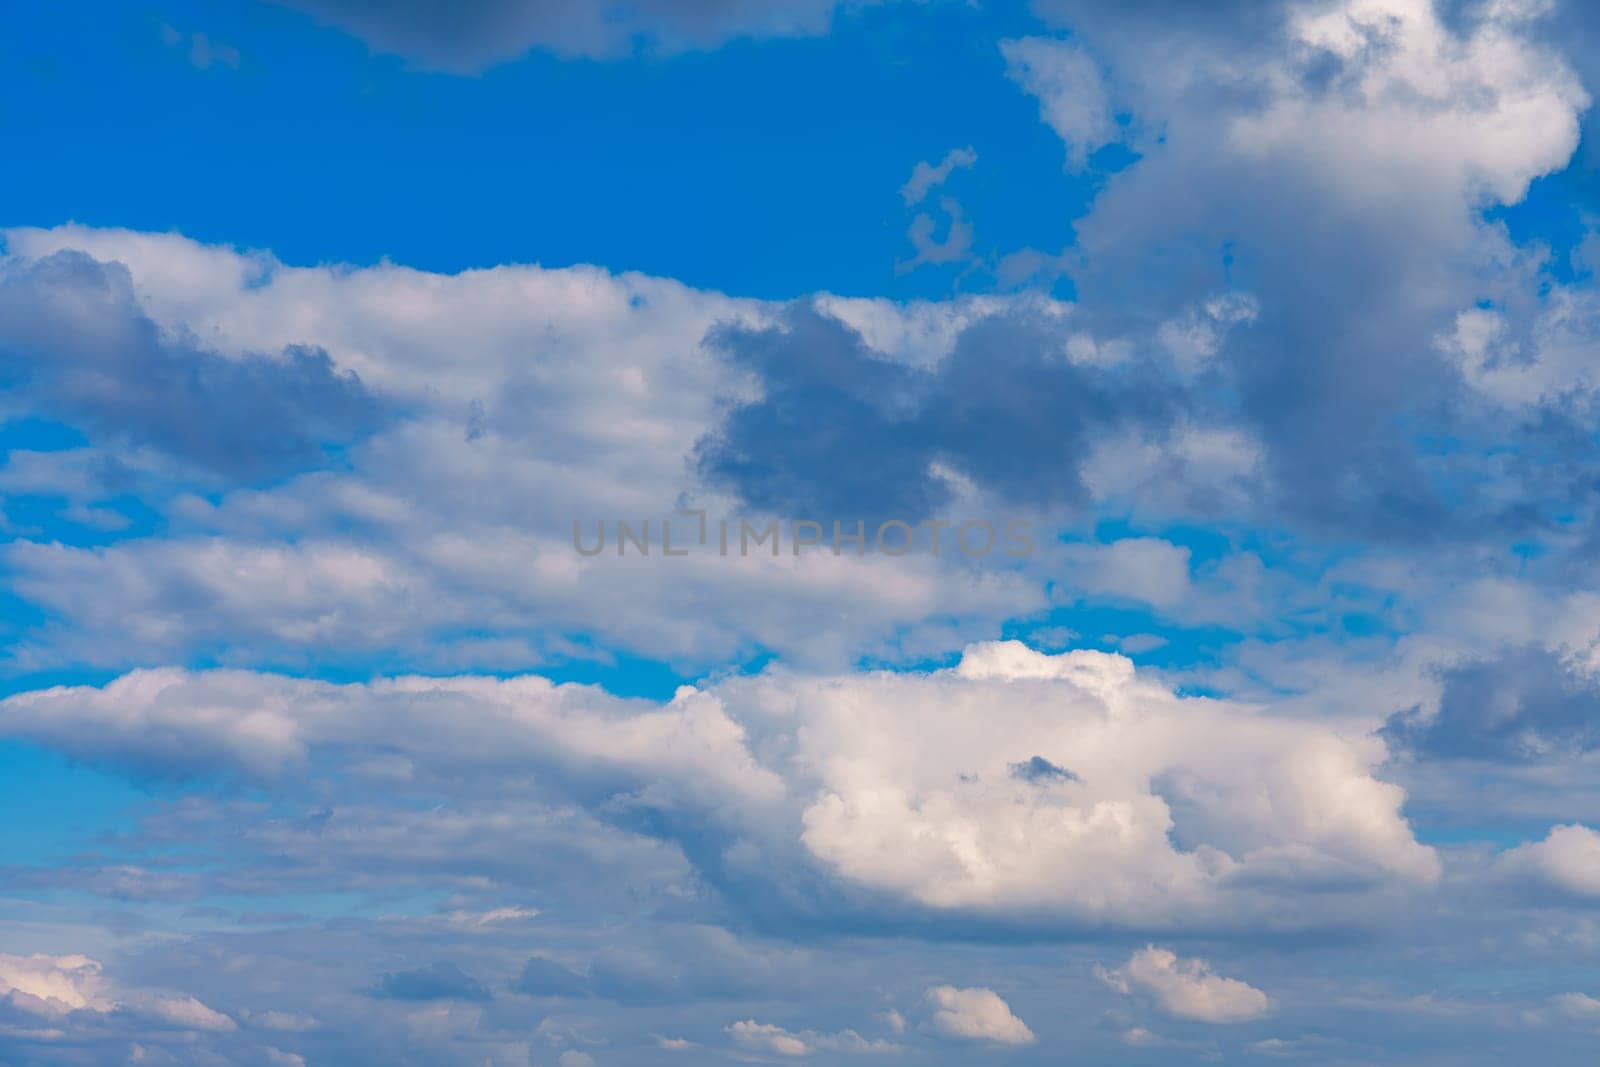 Blue Sky with Lots of White Clouds: Background for Replacement or Inspiring Ideas.